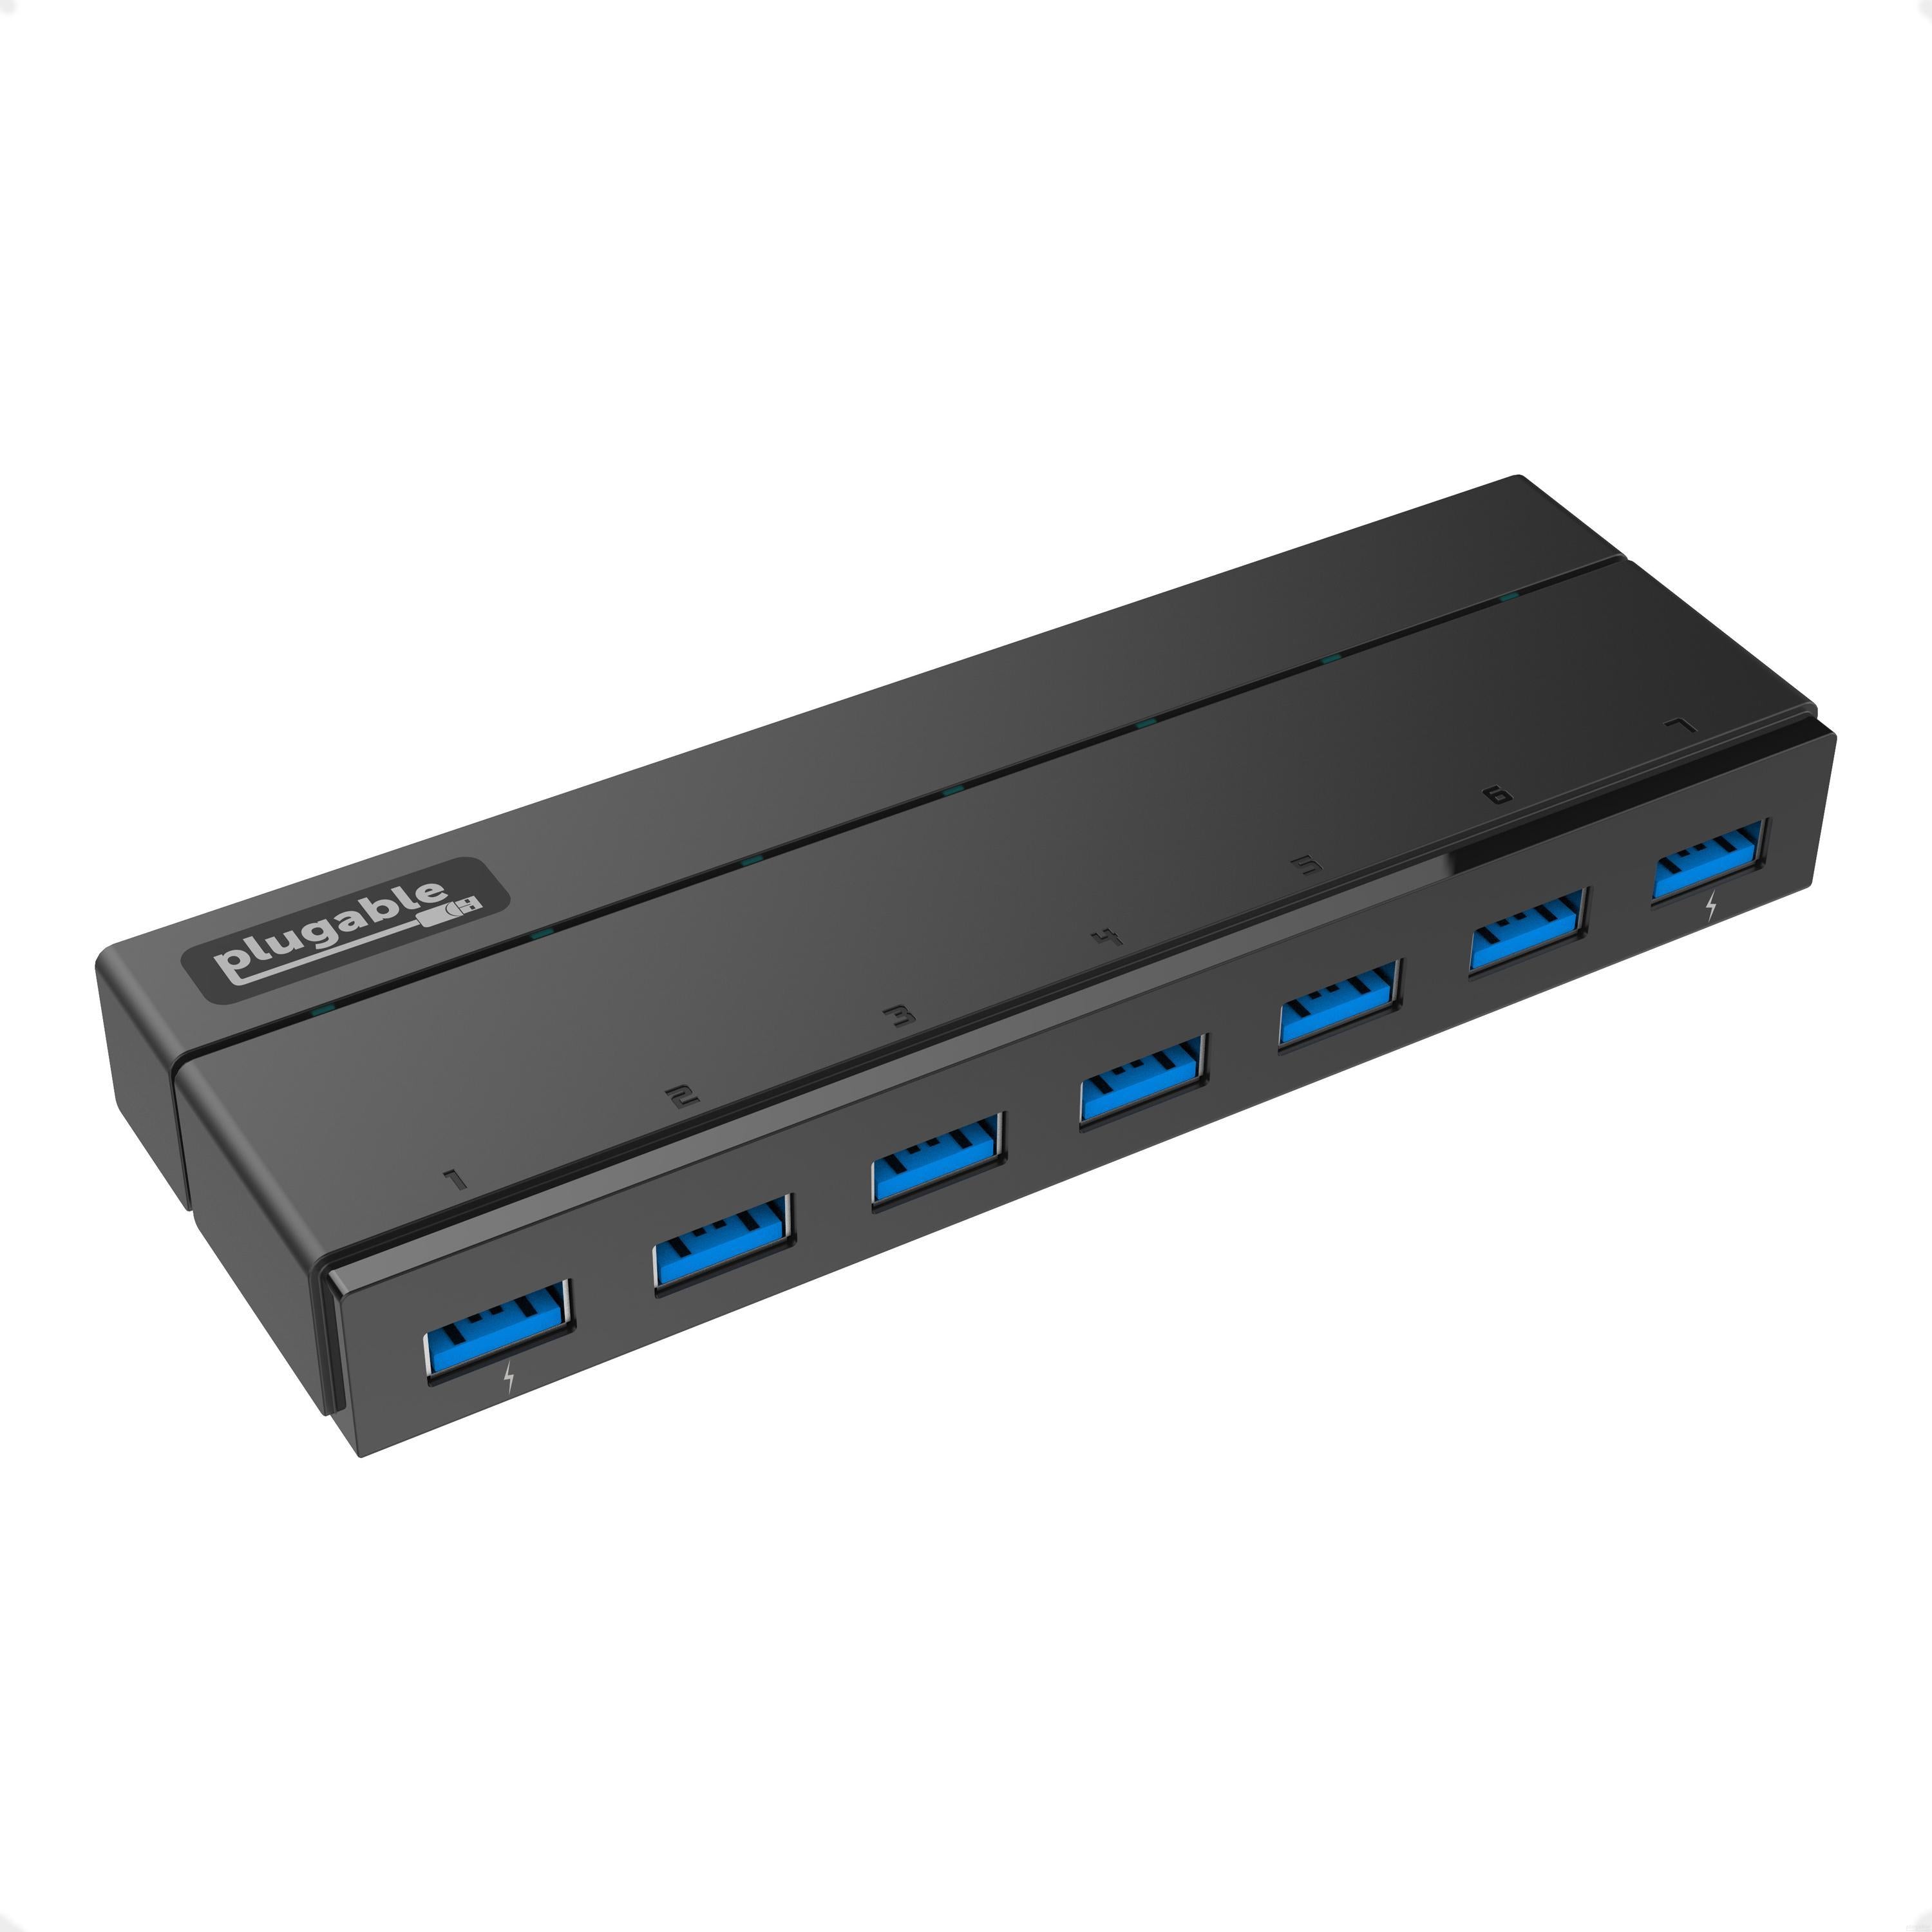 USB 7-Port Hub with BC 1.2 Ports and 36W Power Adapter – Technologies